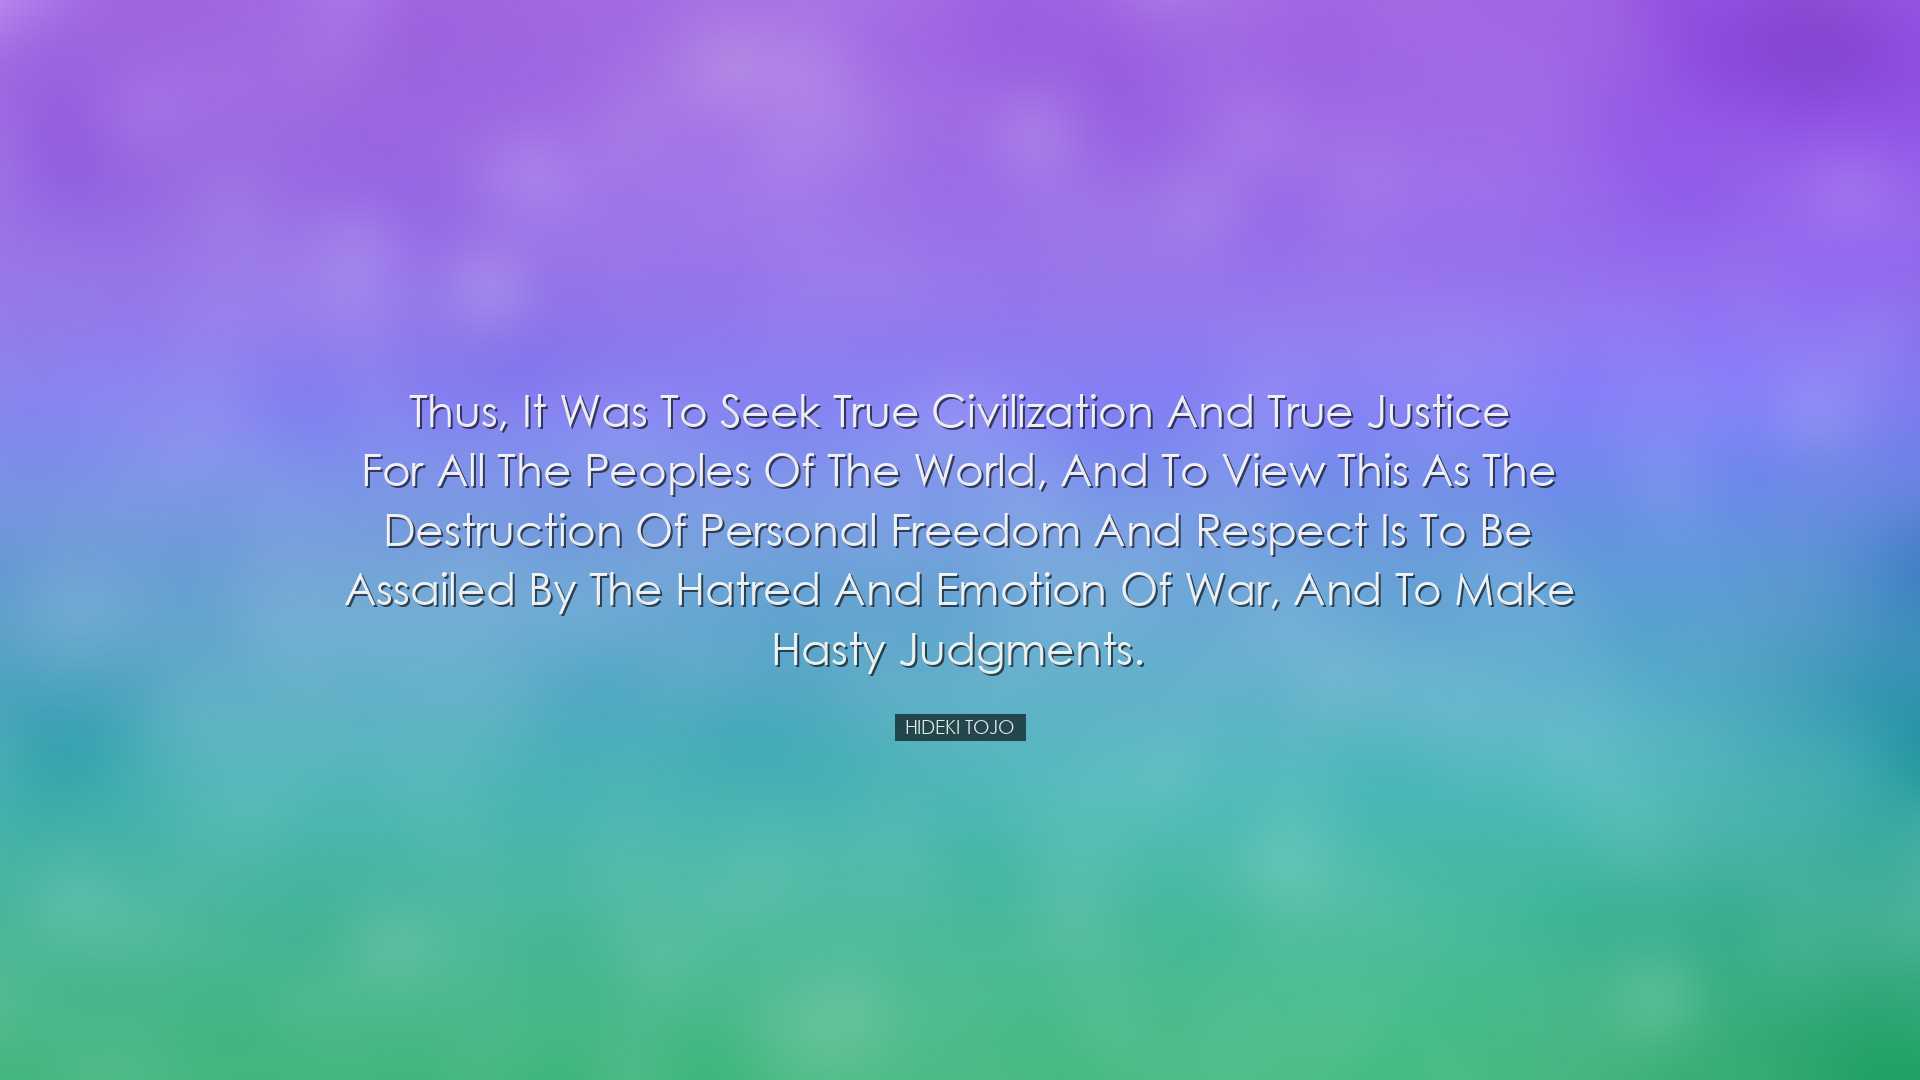 Thus, it was to seek true civilization and true justice for all th